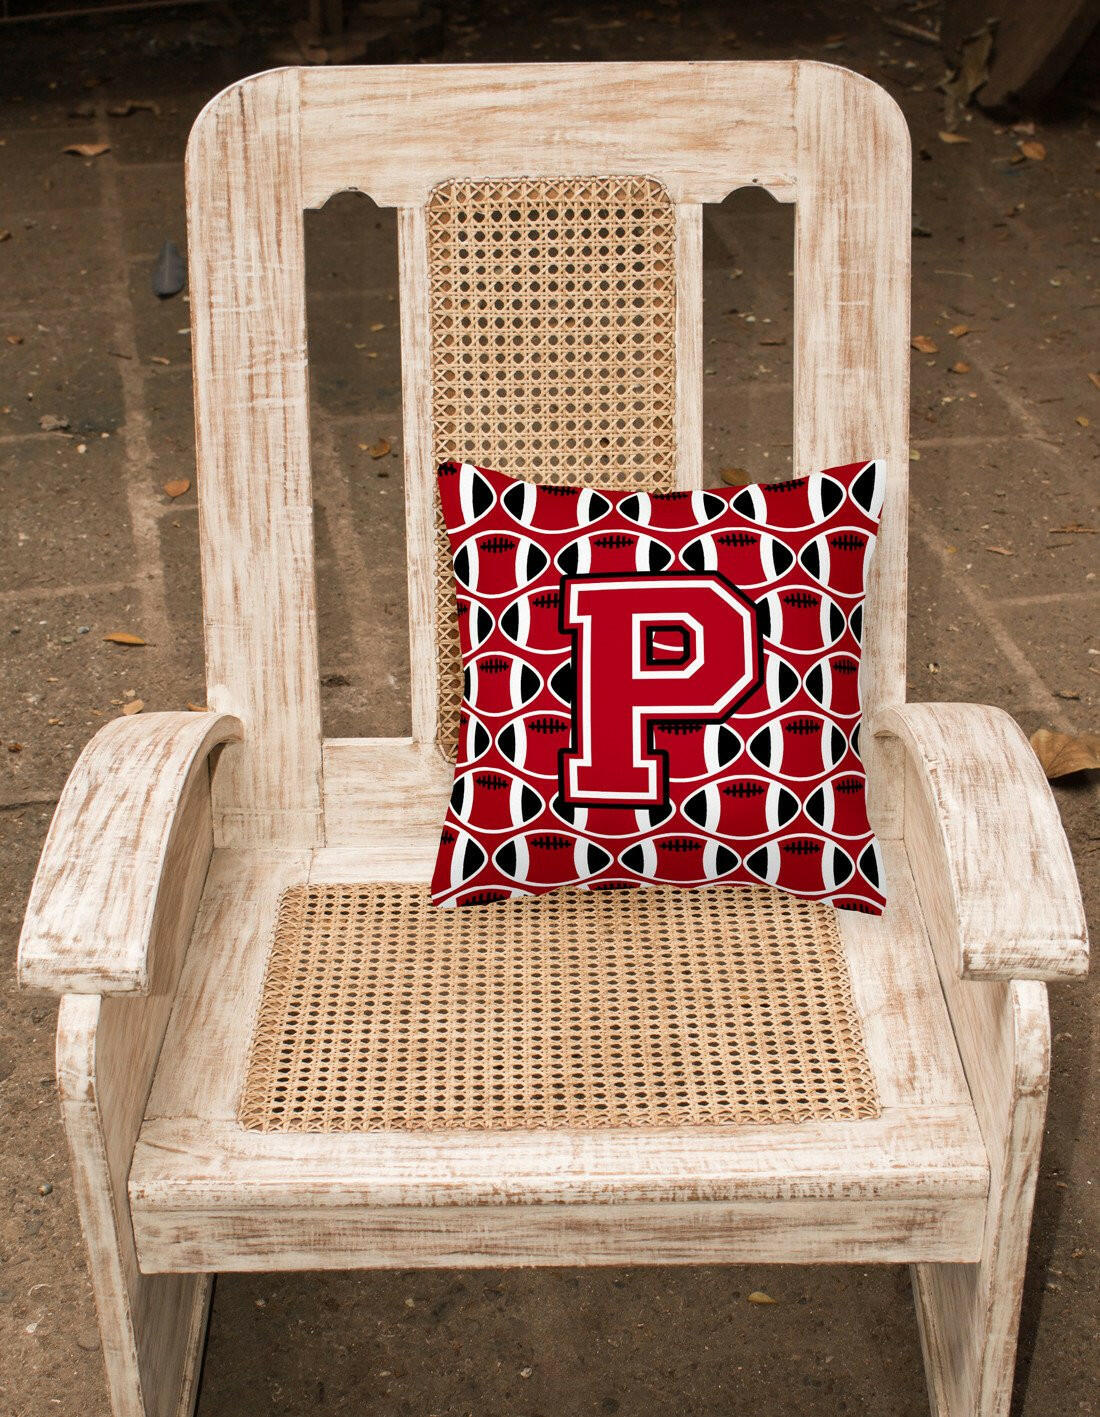 Letter P Football Red, Black and White Fabric Decorative Pillow CJ1073-PPW1414 by Caroline's Treasures